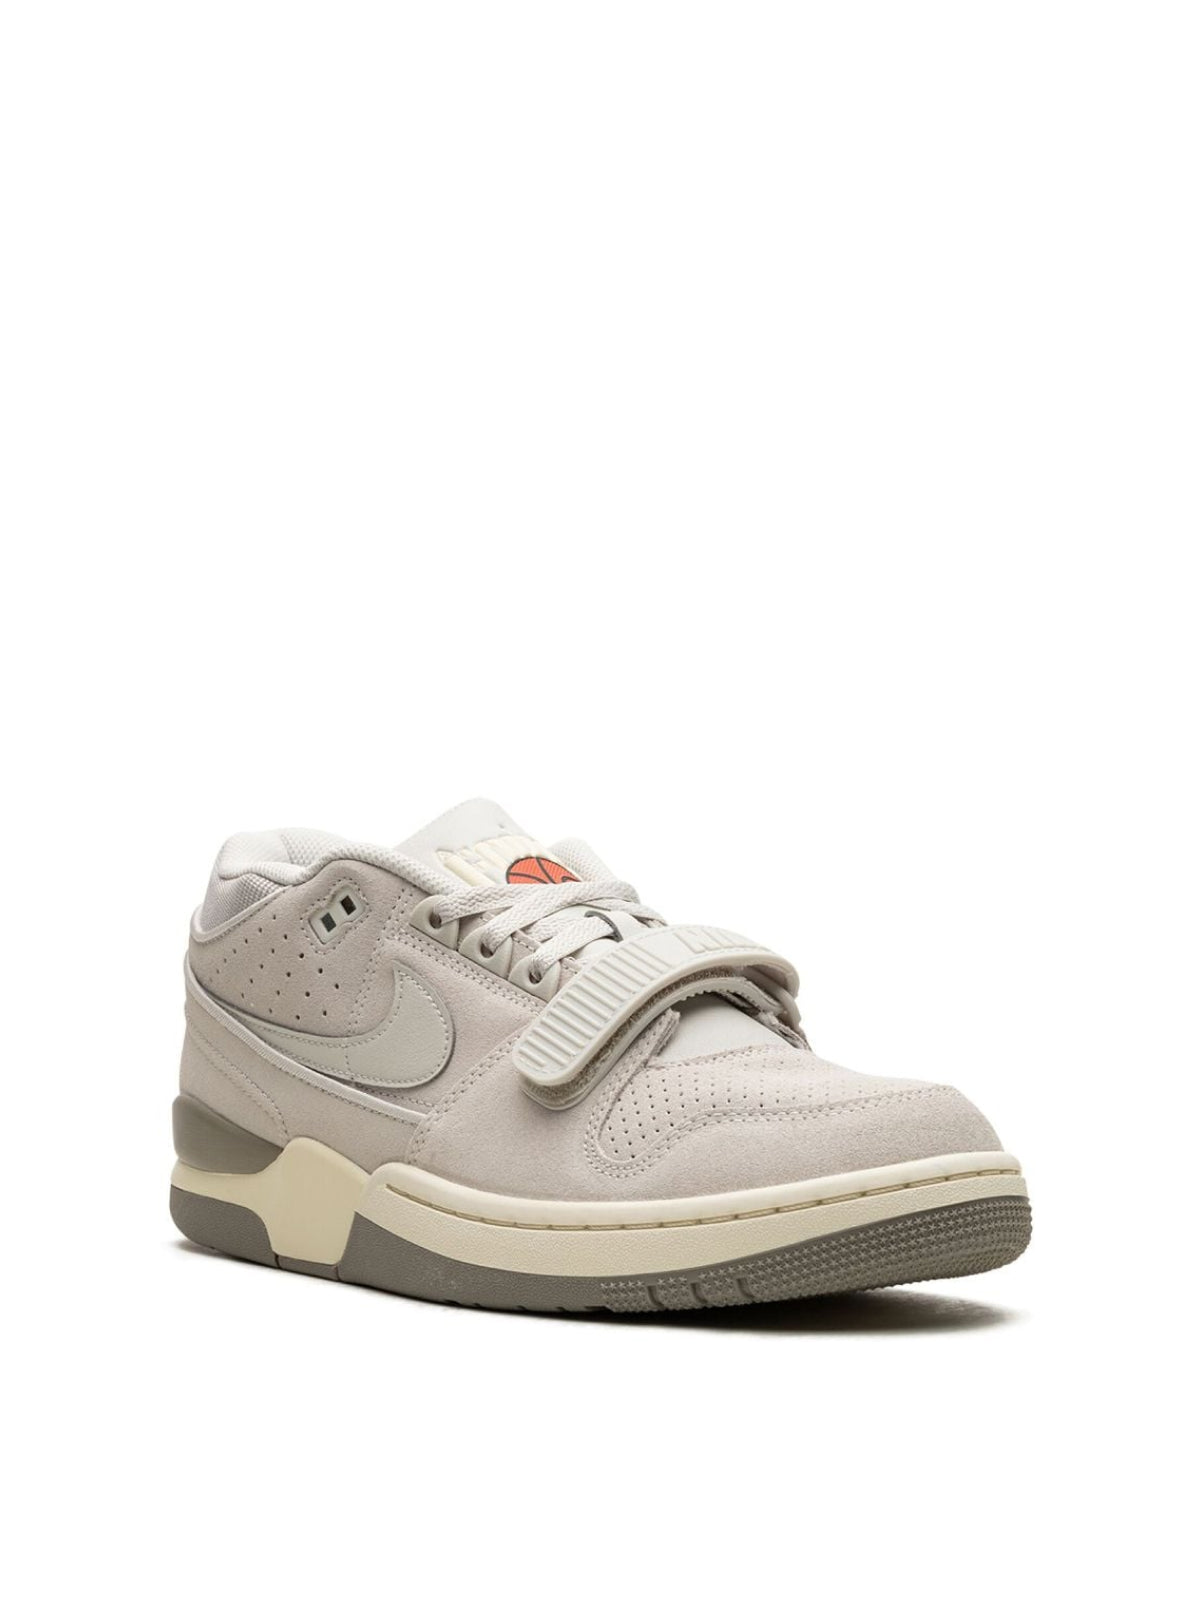 Nike-OUTLET-SALE-Alpha Force AAF88 Sneakers-ARCHIVIST